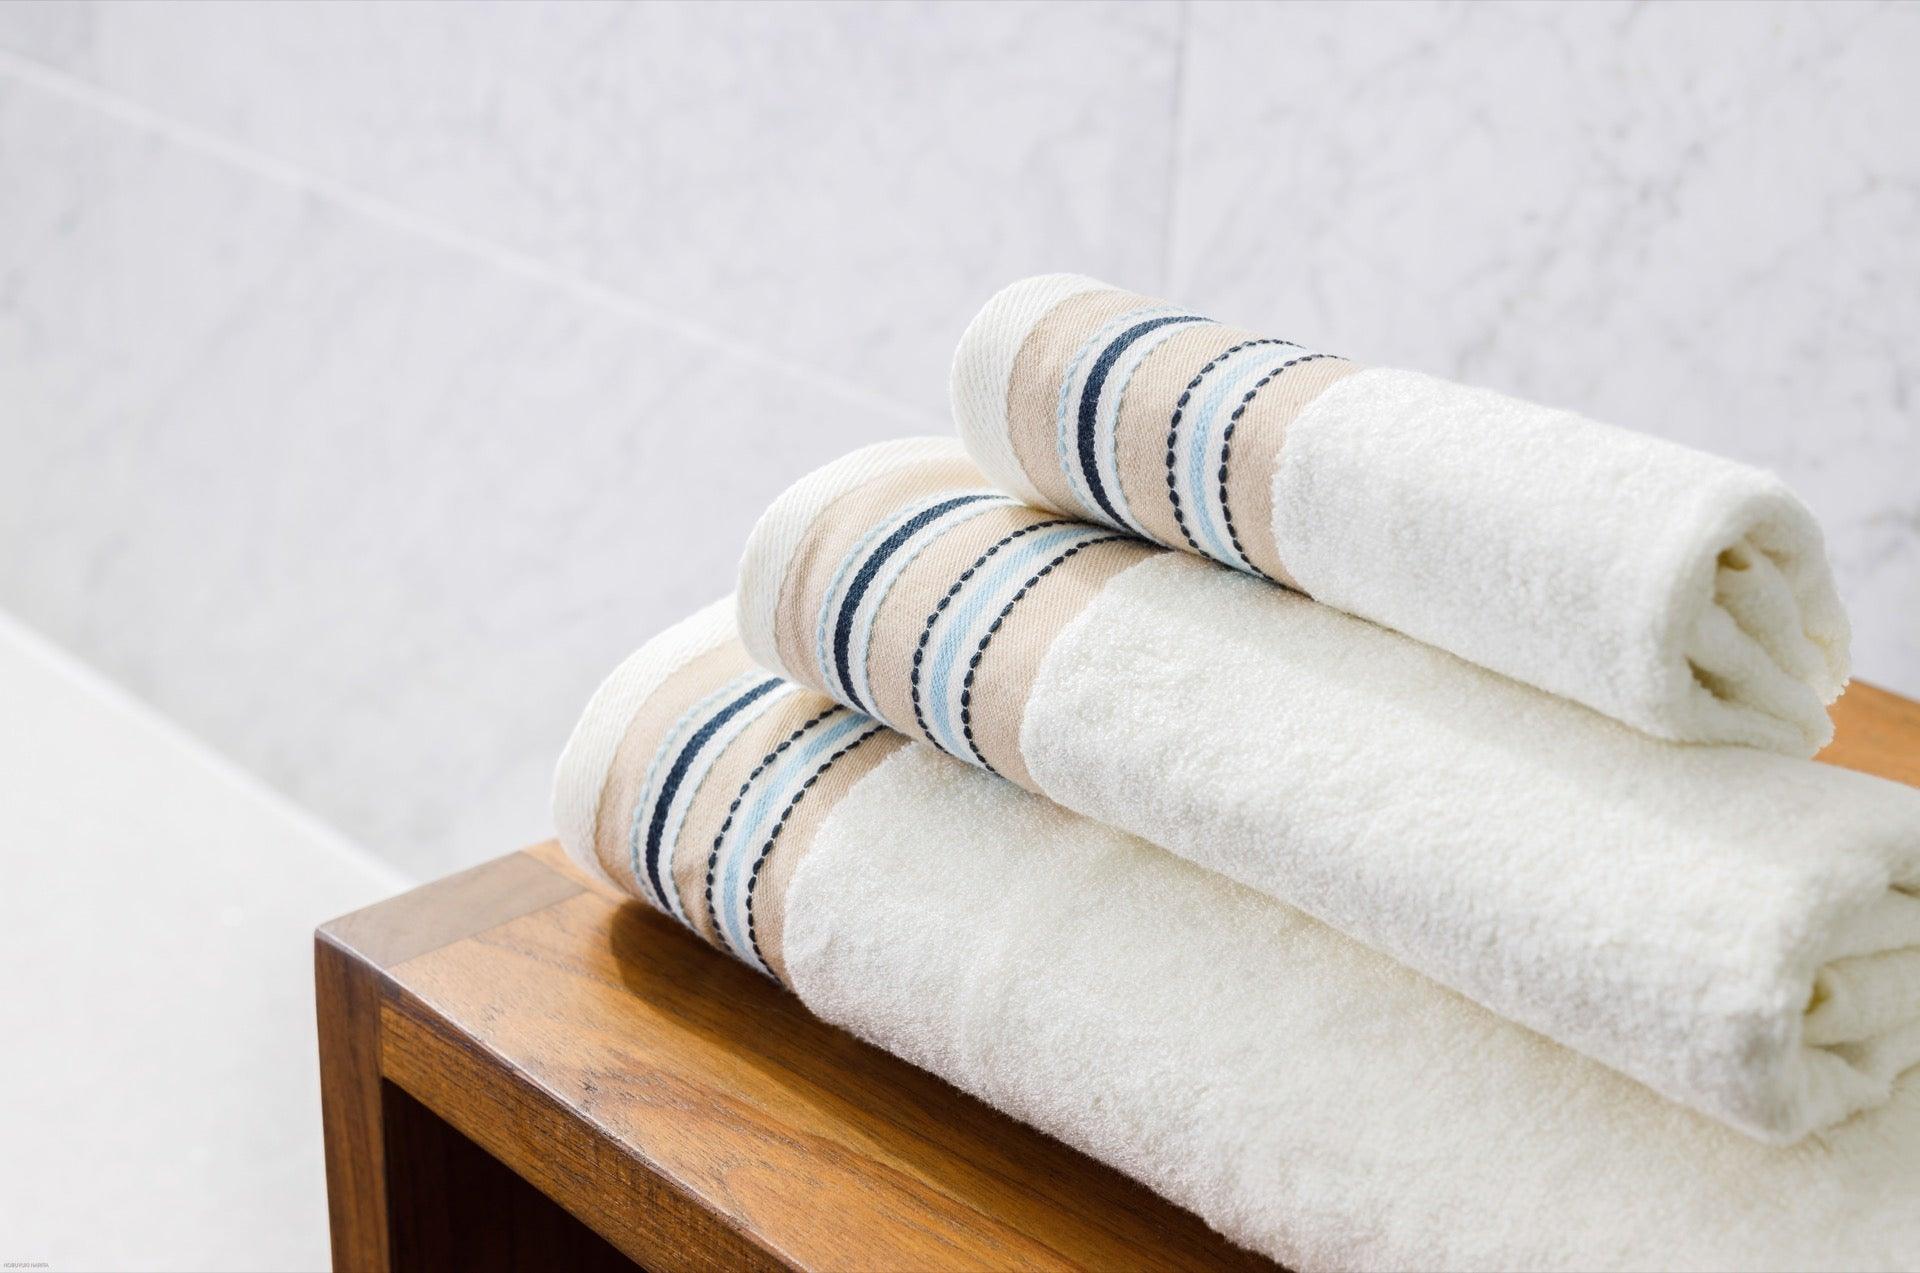 Striped Jacquard Bamboo Towel Set - NOT LABELED